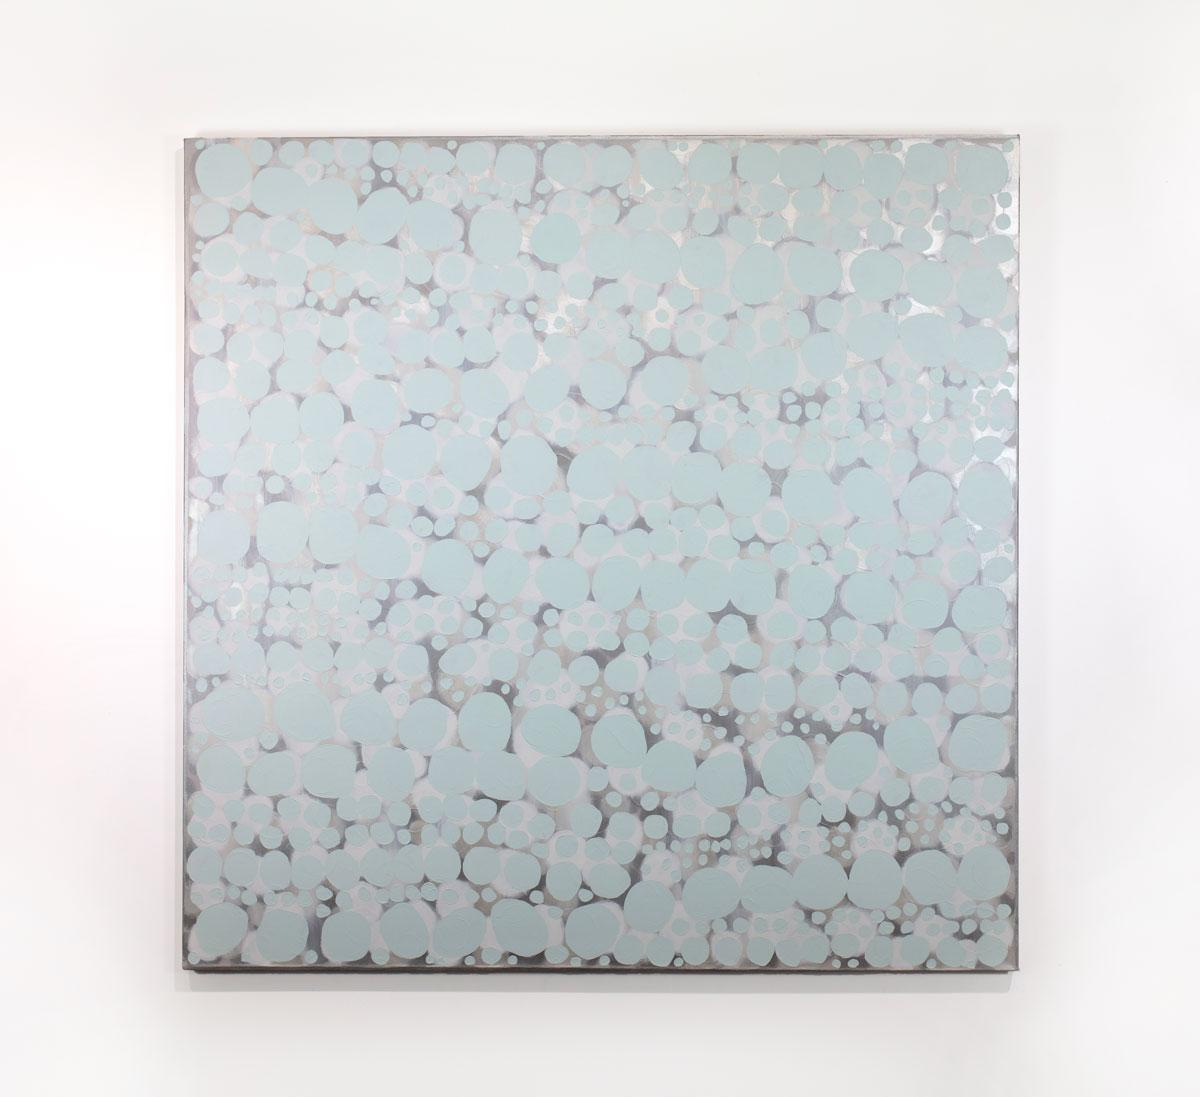 This large abstract statement painting by Sofie Swann features a light grey palette with subtle metallic silver accents, and imperfect circular forms arranged in a pattern throughout the composition. This painting is made on gallery wrapped canvas